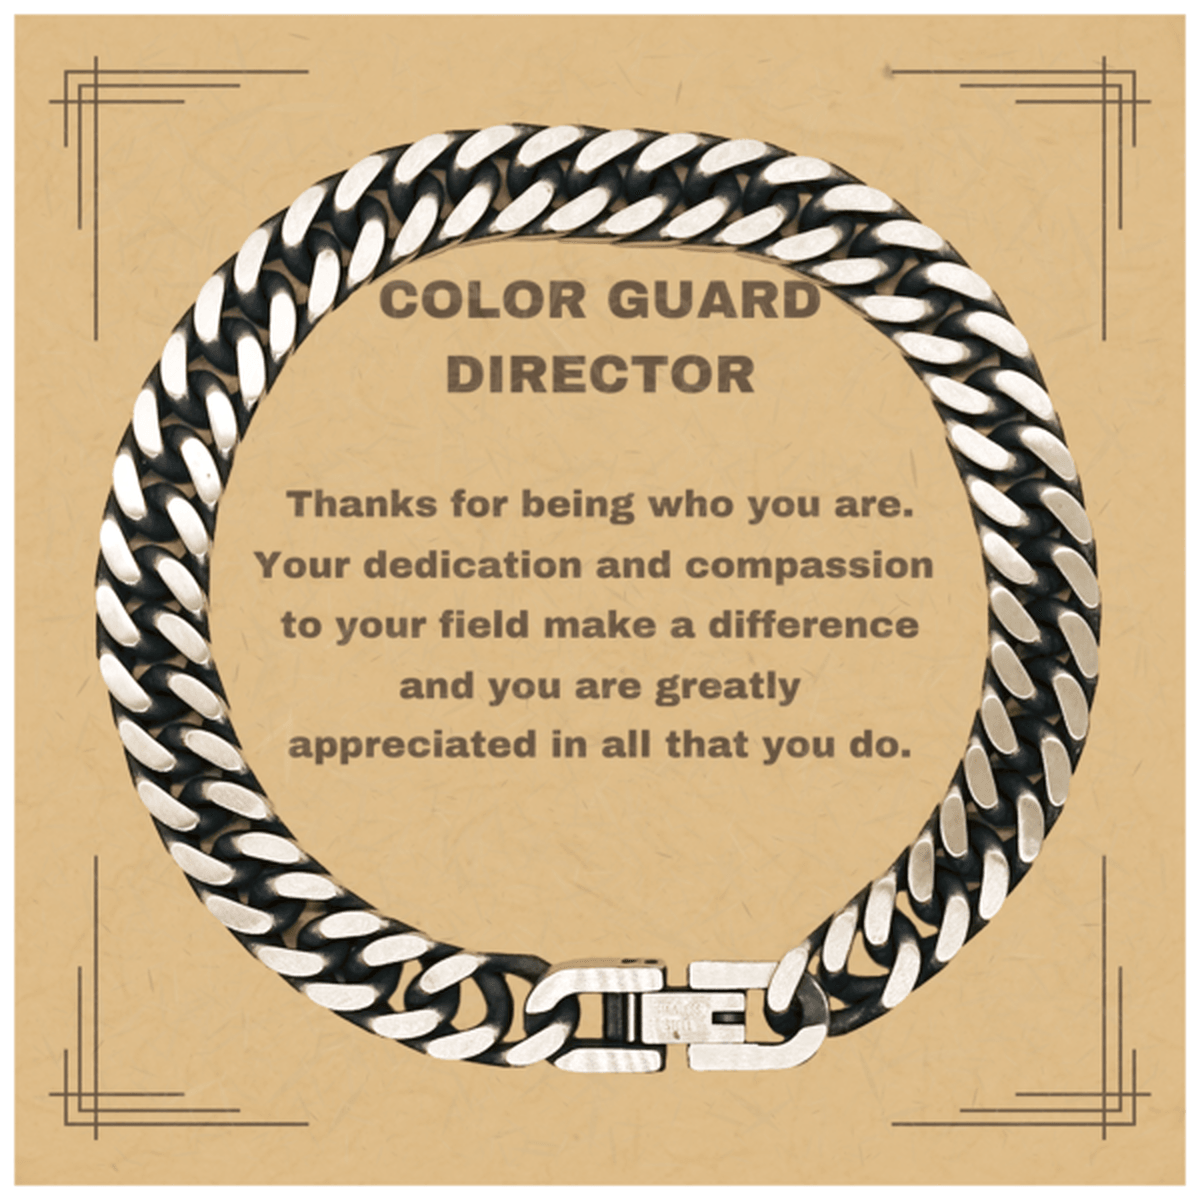 Color Guard DirectorCuban Chain Link Bracelet - Thanks for being who you are - Birthday Christmas Jewelry Gifts Coworkers Colleague Boss - Mallard Moon Gift Shop